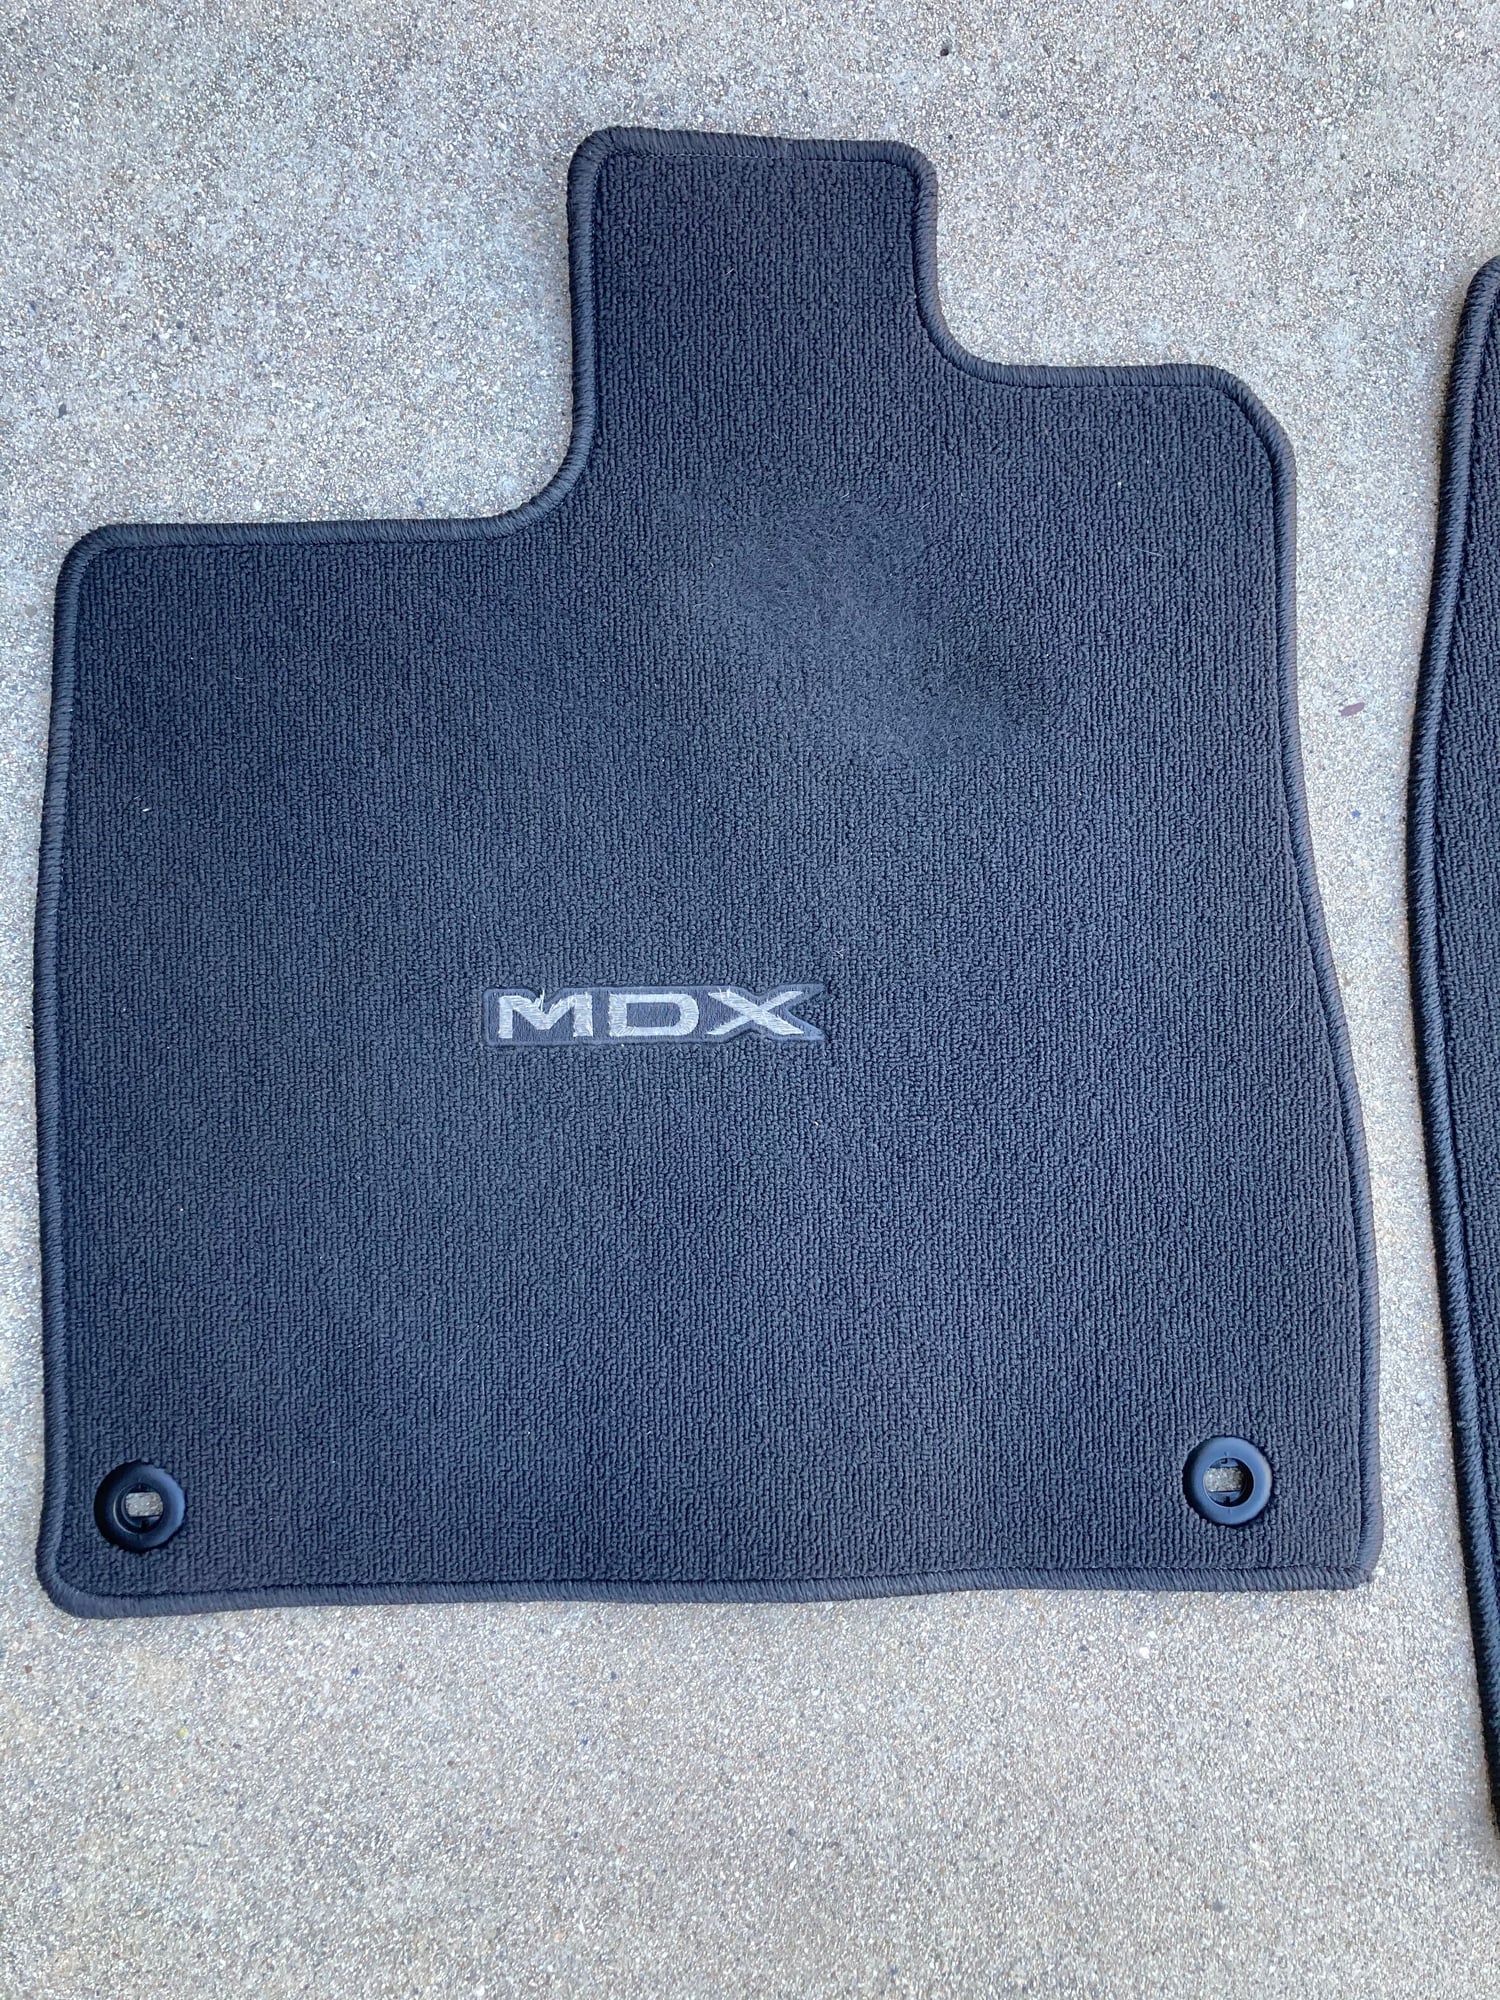 Accessories - FS: Carpet Mats 2017 to 2020 MDX Factory OEM.  Used 20K miles - Used - 2017 to 2020 Acura MDX - Los Angeles, CA 90067, United States